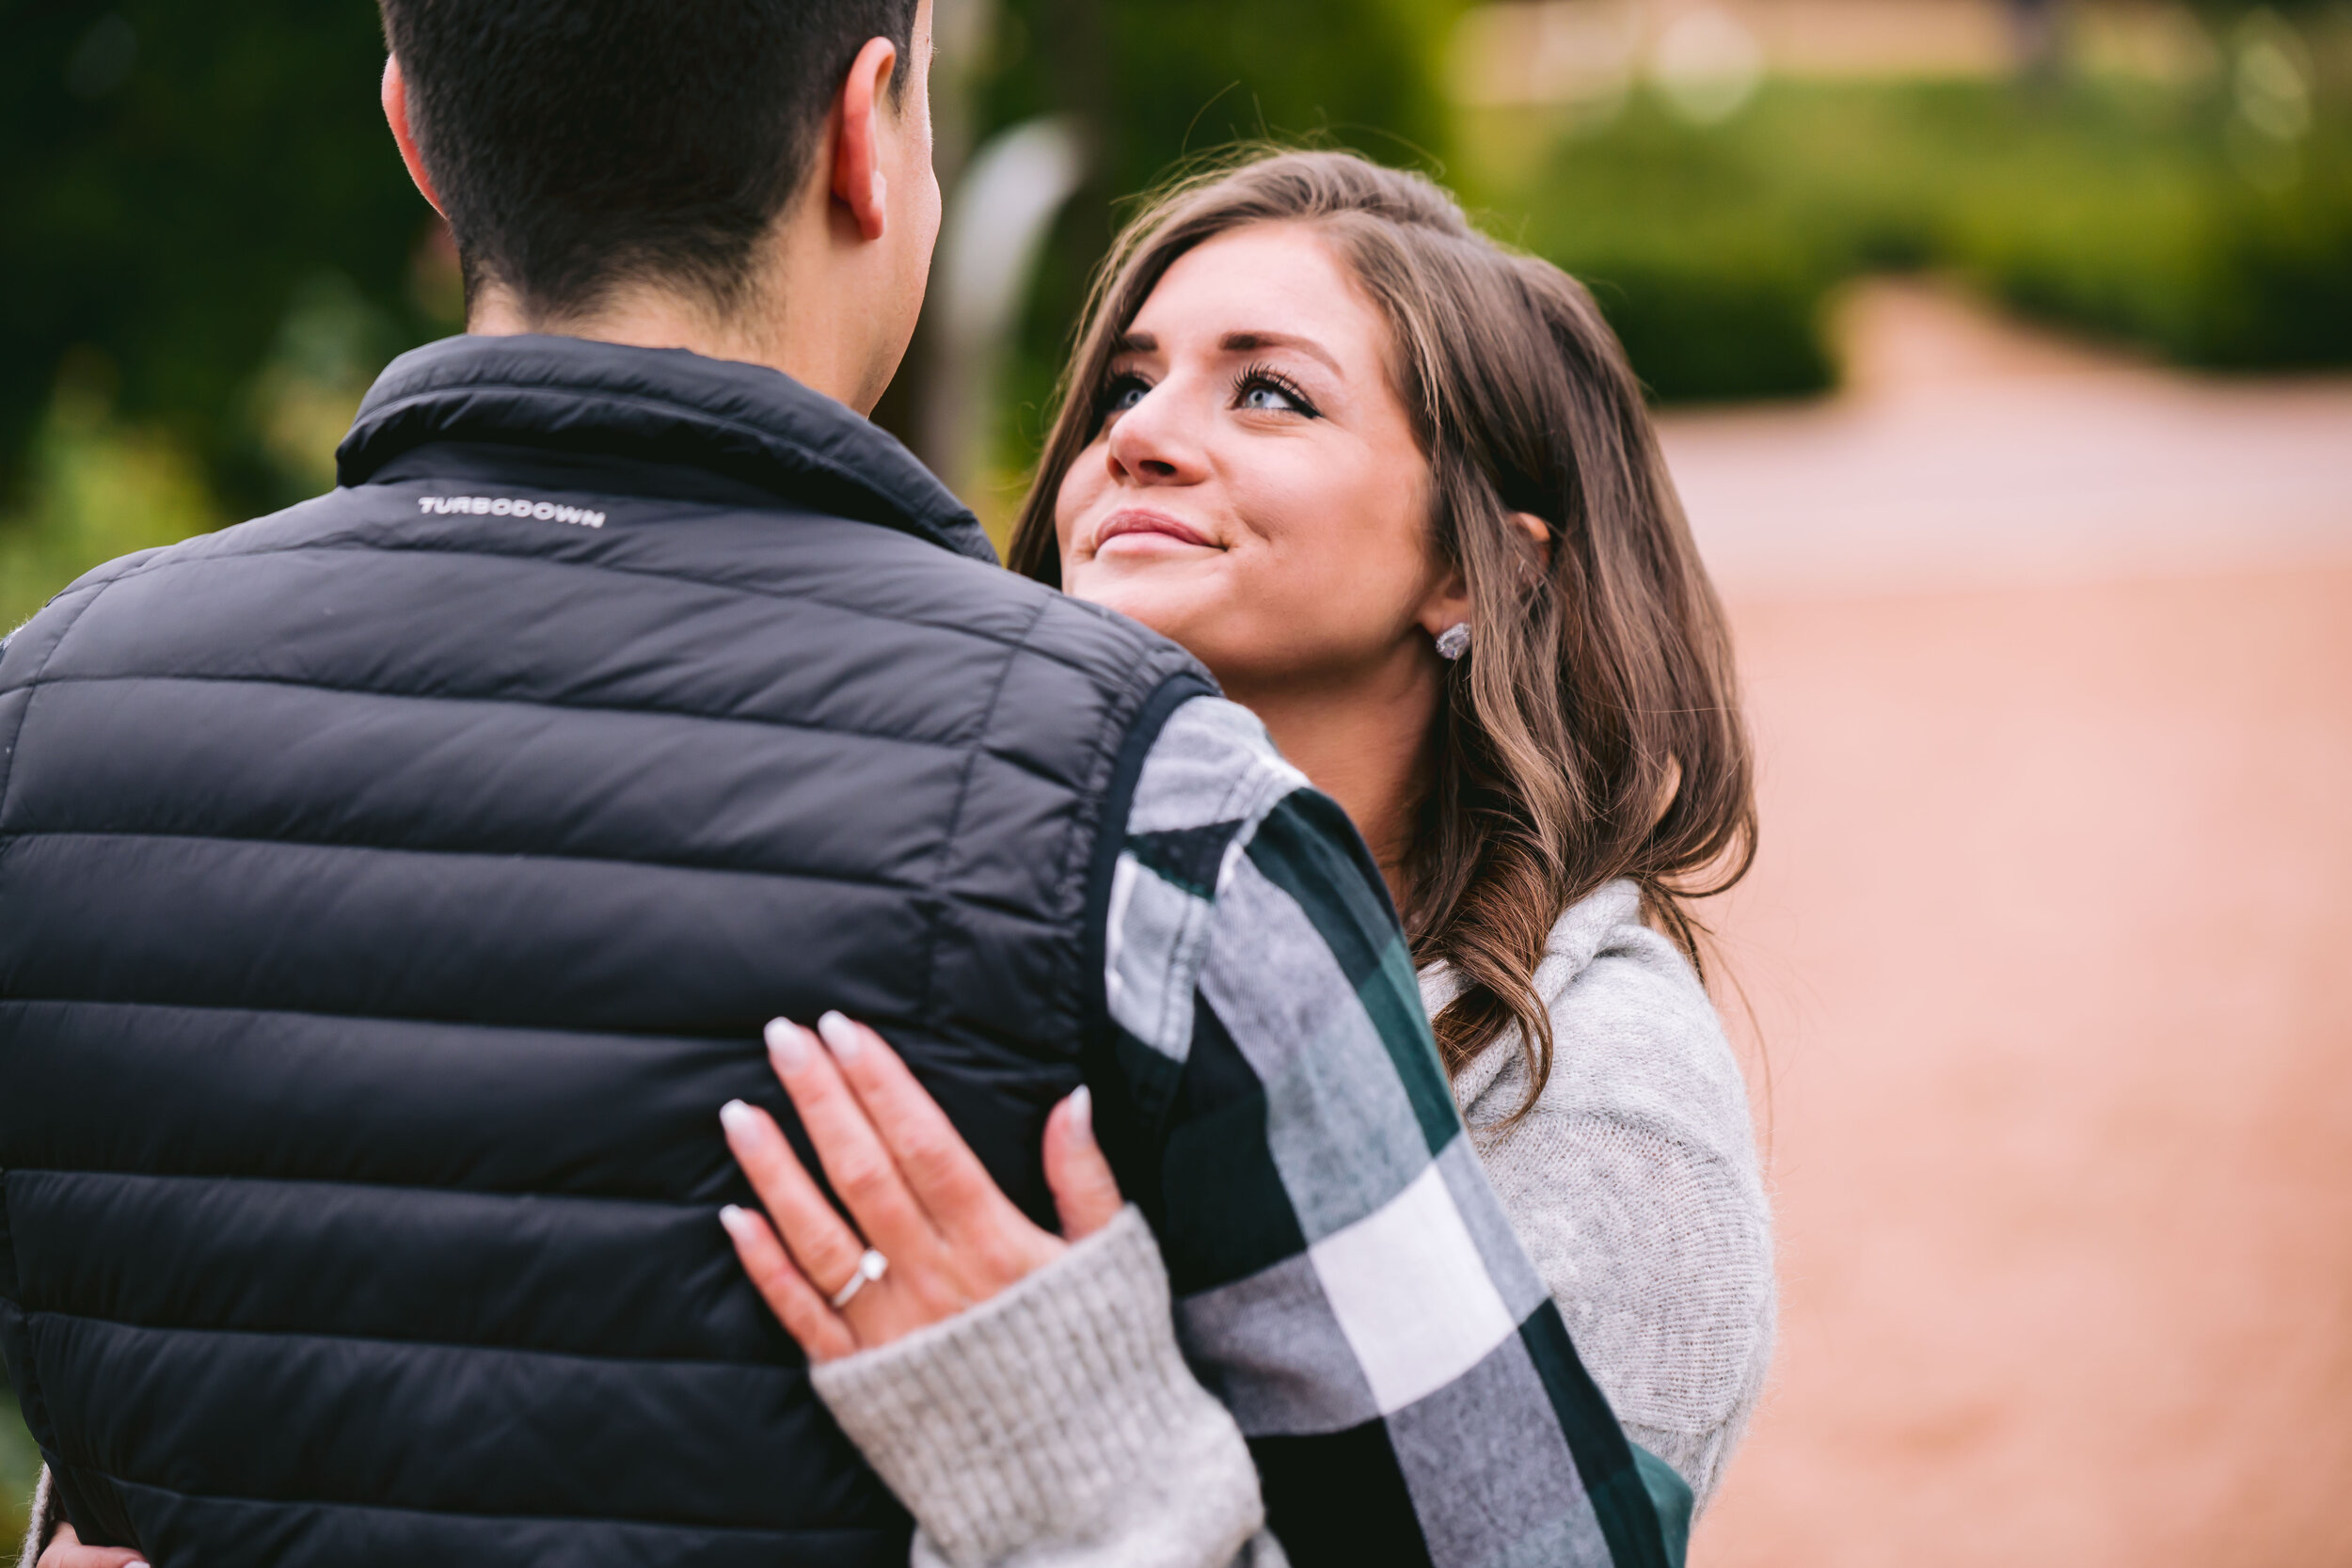 ROMANTIC FALL ENGAGEMENT SESSION AT CANTIGNY PARK IN WHEATON, IL